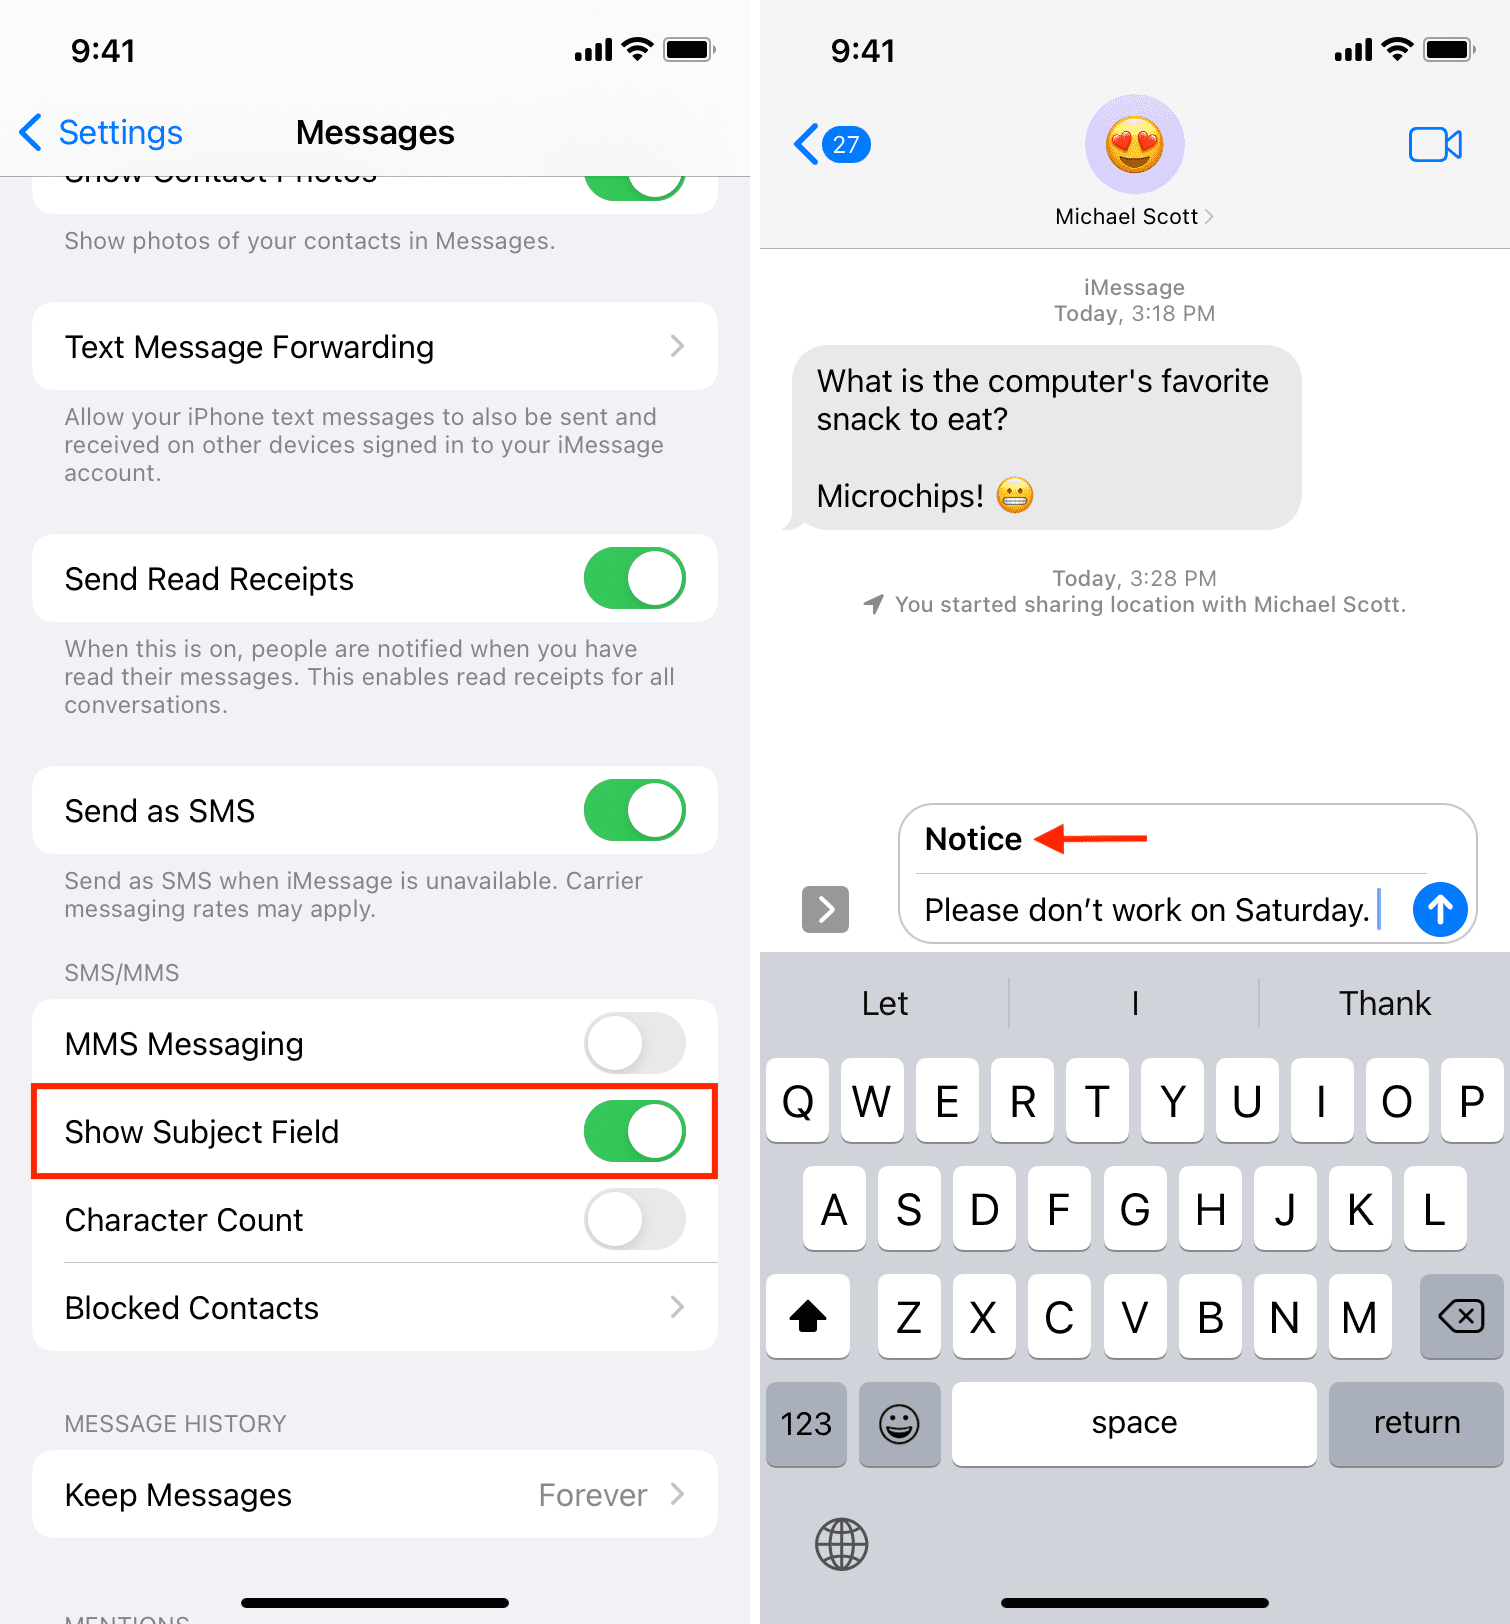 Show Subject Field to write iMessage in bold